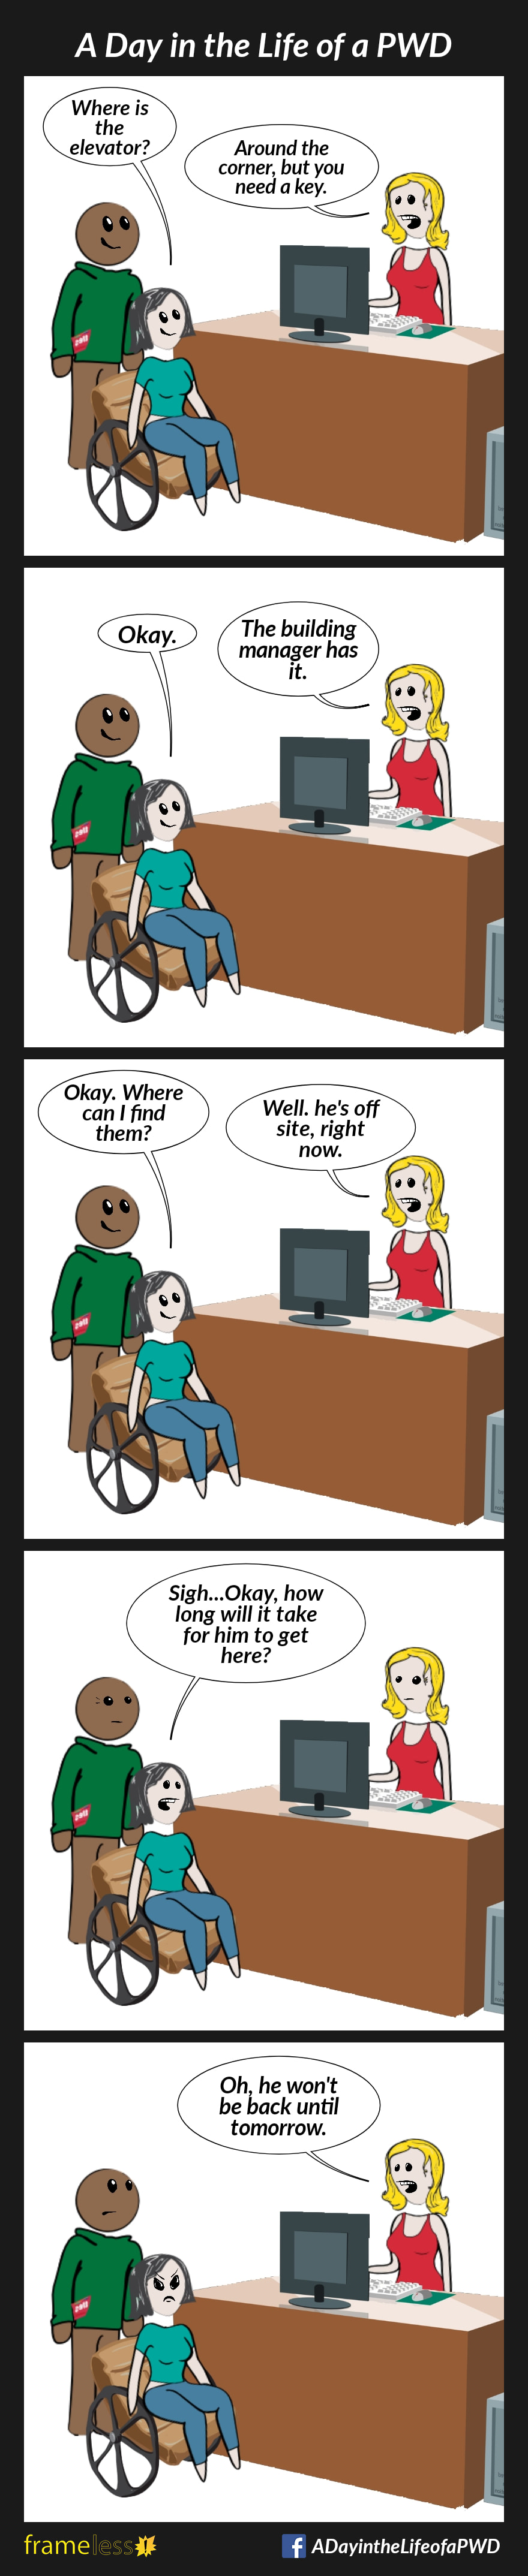 COMIC STRIP 
A Day in the Life of a PWD (Person With a Disability) 

Frame 1:
A woman in a wheelchair and her friend approach a front desk clerk.
WOMAN: Where is the elevator?
CLERK: Around the corner, but you need a key.

Frame 2:
WOMAN: Okay.
CLERK: The building manager has it.

Frame 3:
WOMAN: Okay. Where can I find them?
CLERK: Well, he's off site right now.

Frame 4:
WOMAN: Sigh...Okay, how long will it take him to get here?

Frame 5:
CLERK: Oh, he won't be back until tomorrow. 